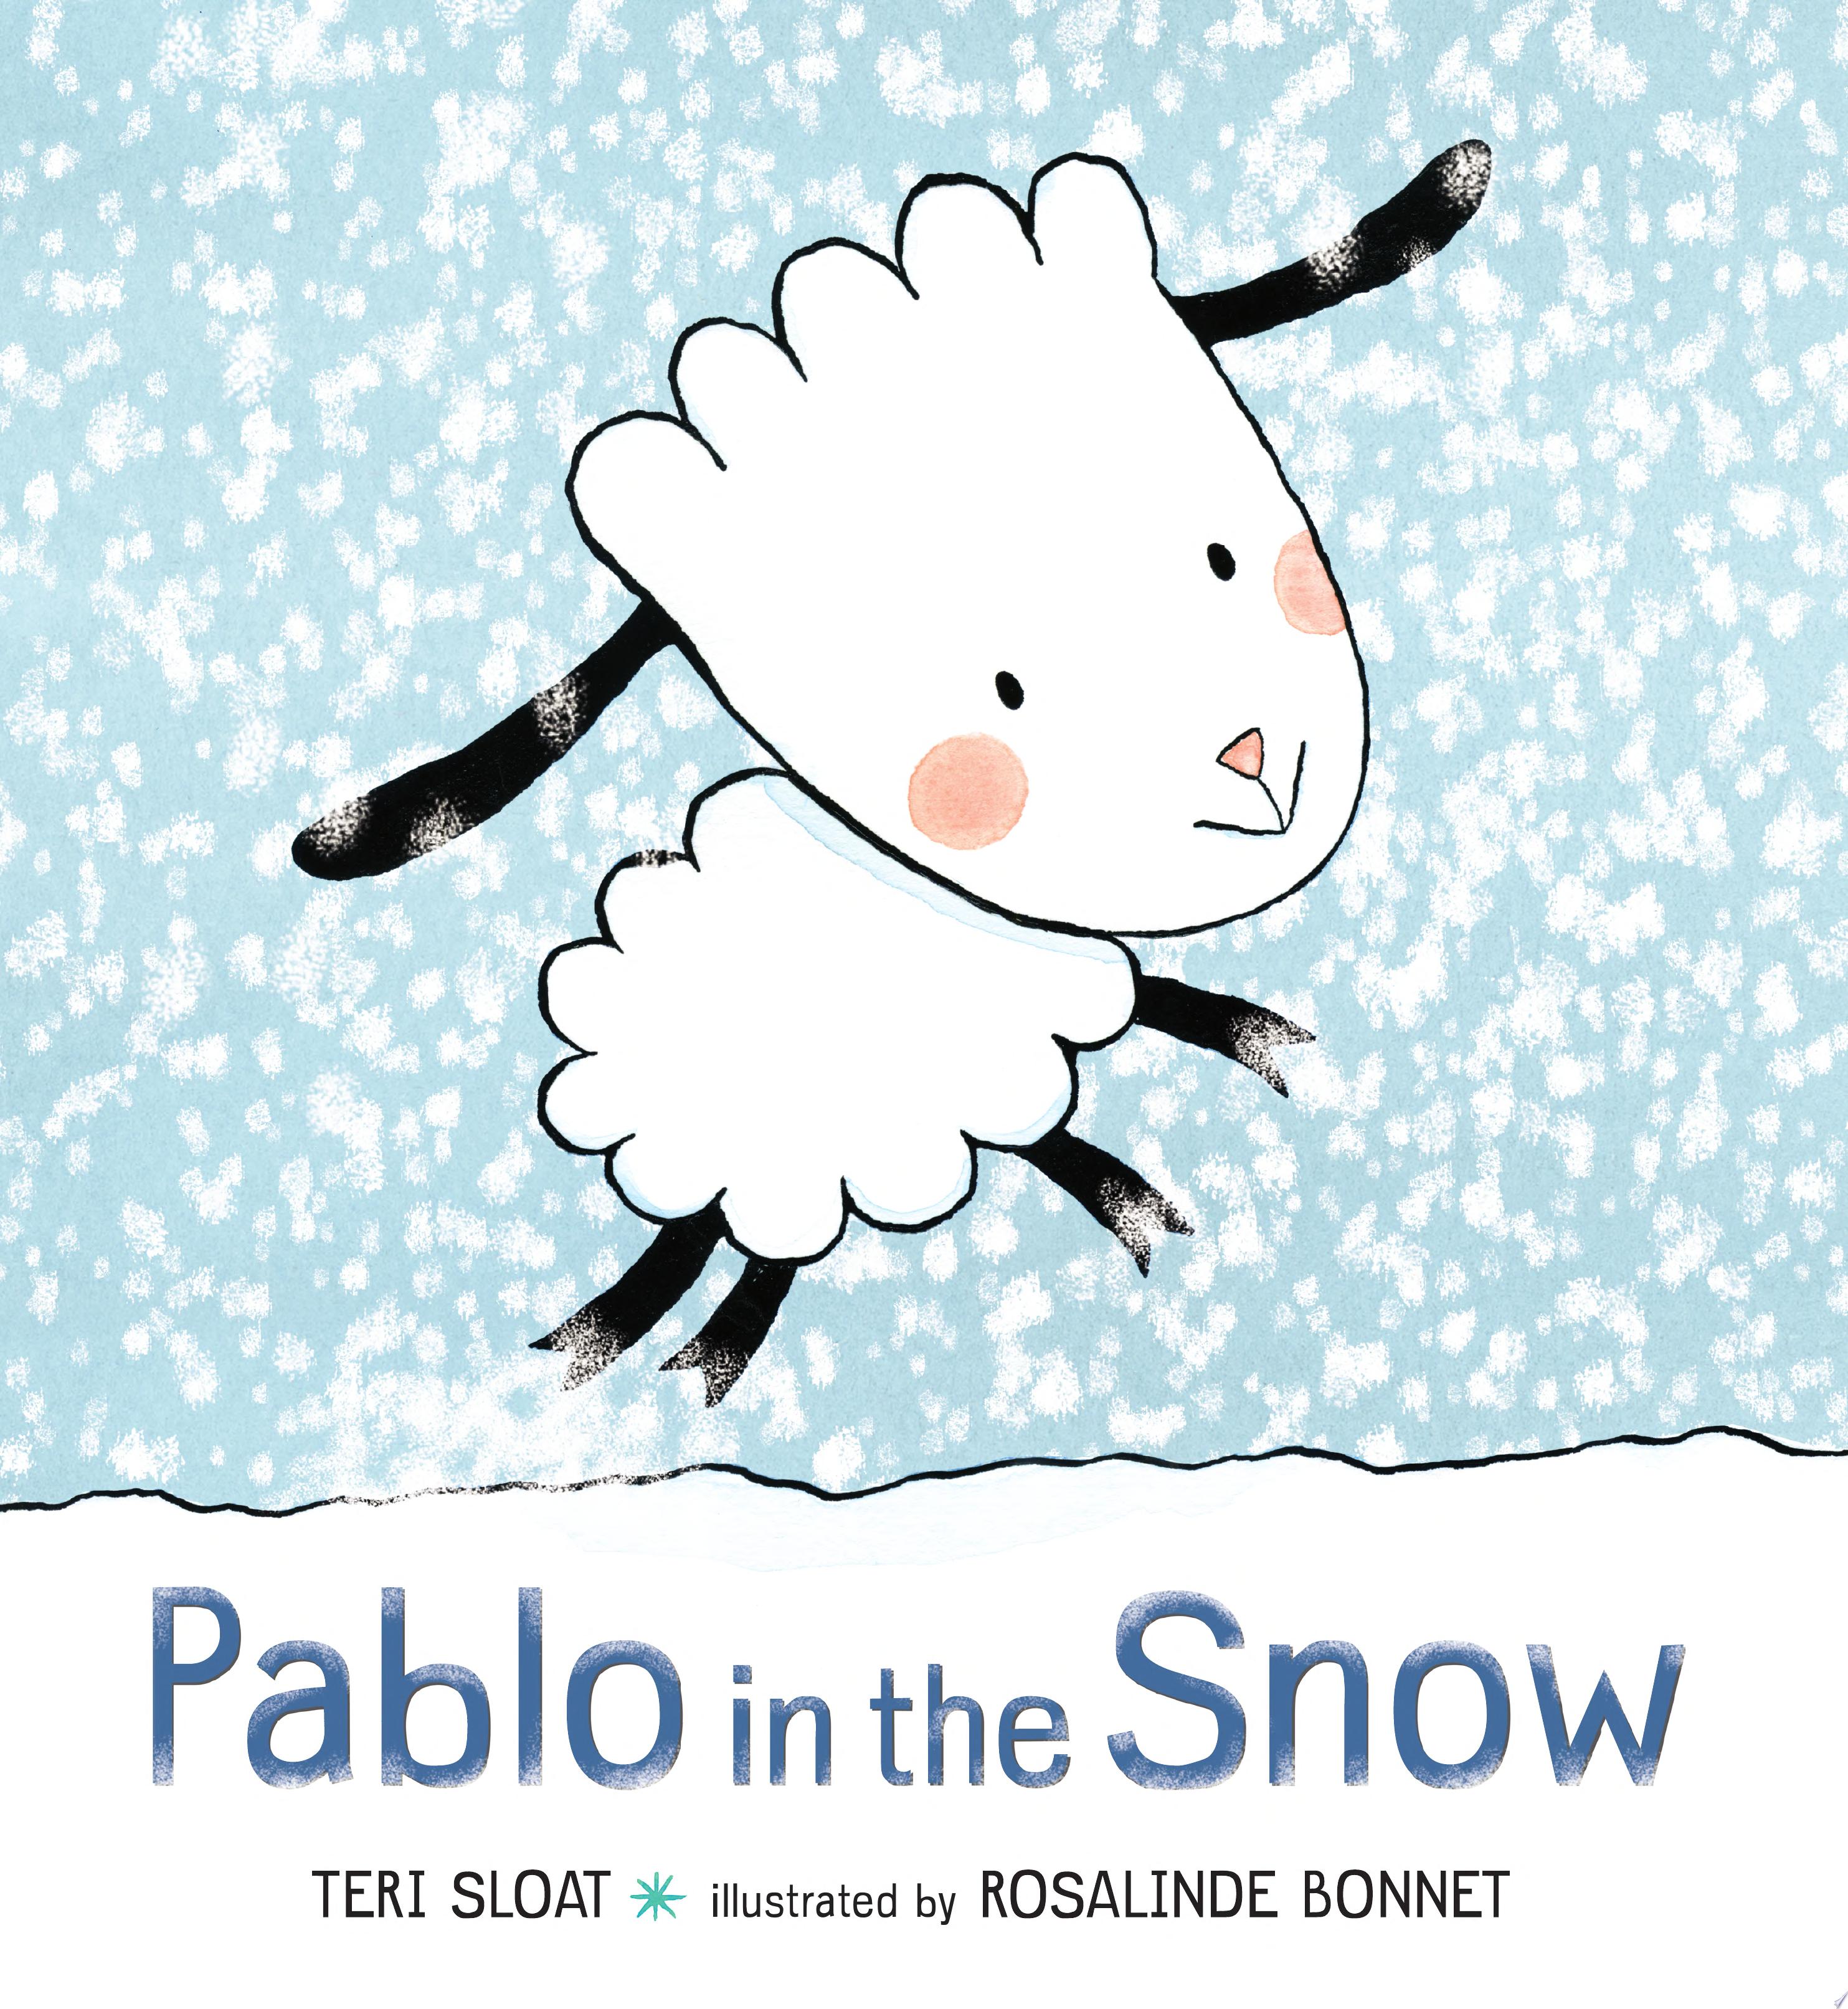 Image for "Pablo in the Snow"